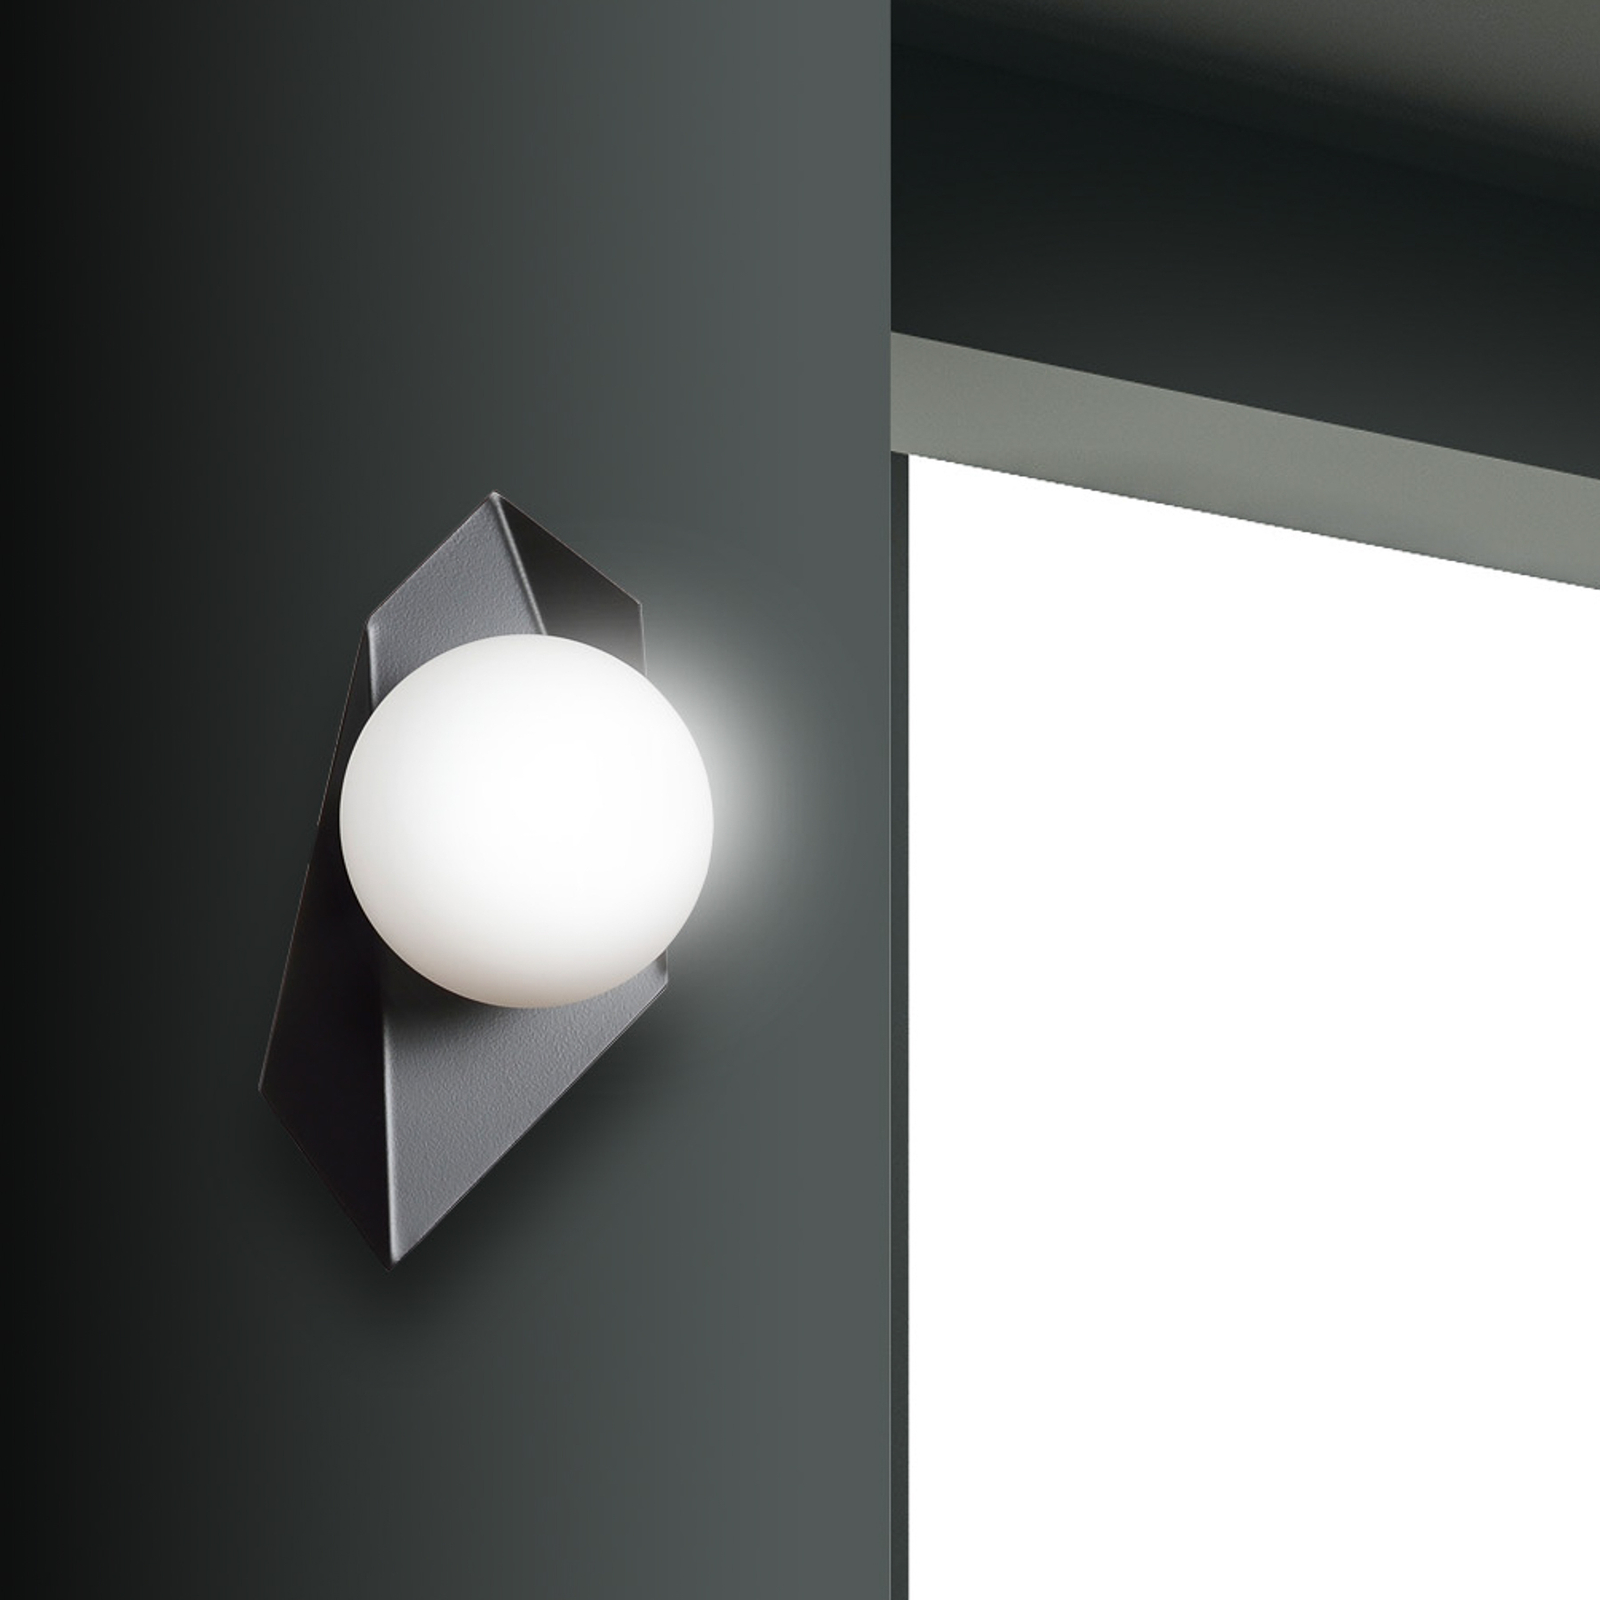 Shield wall light in black and white, one-bulb